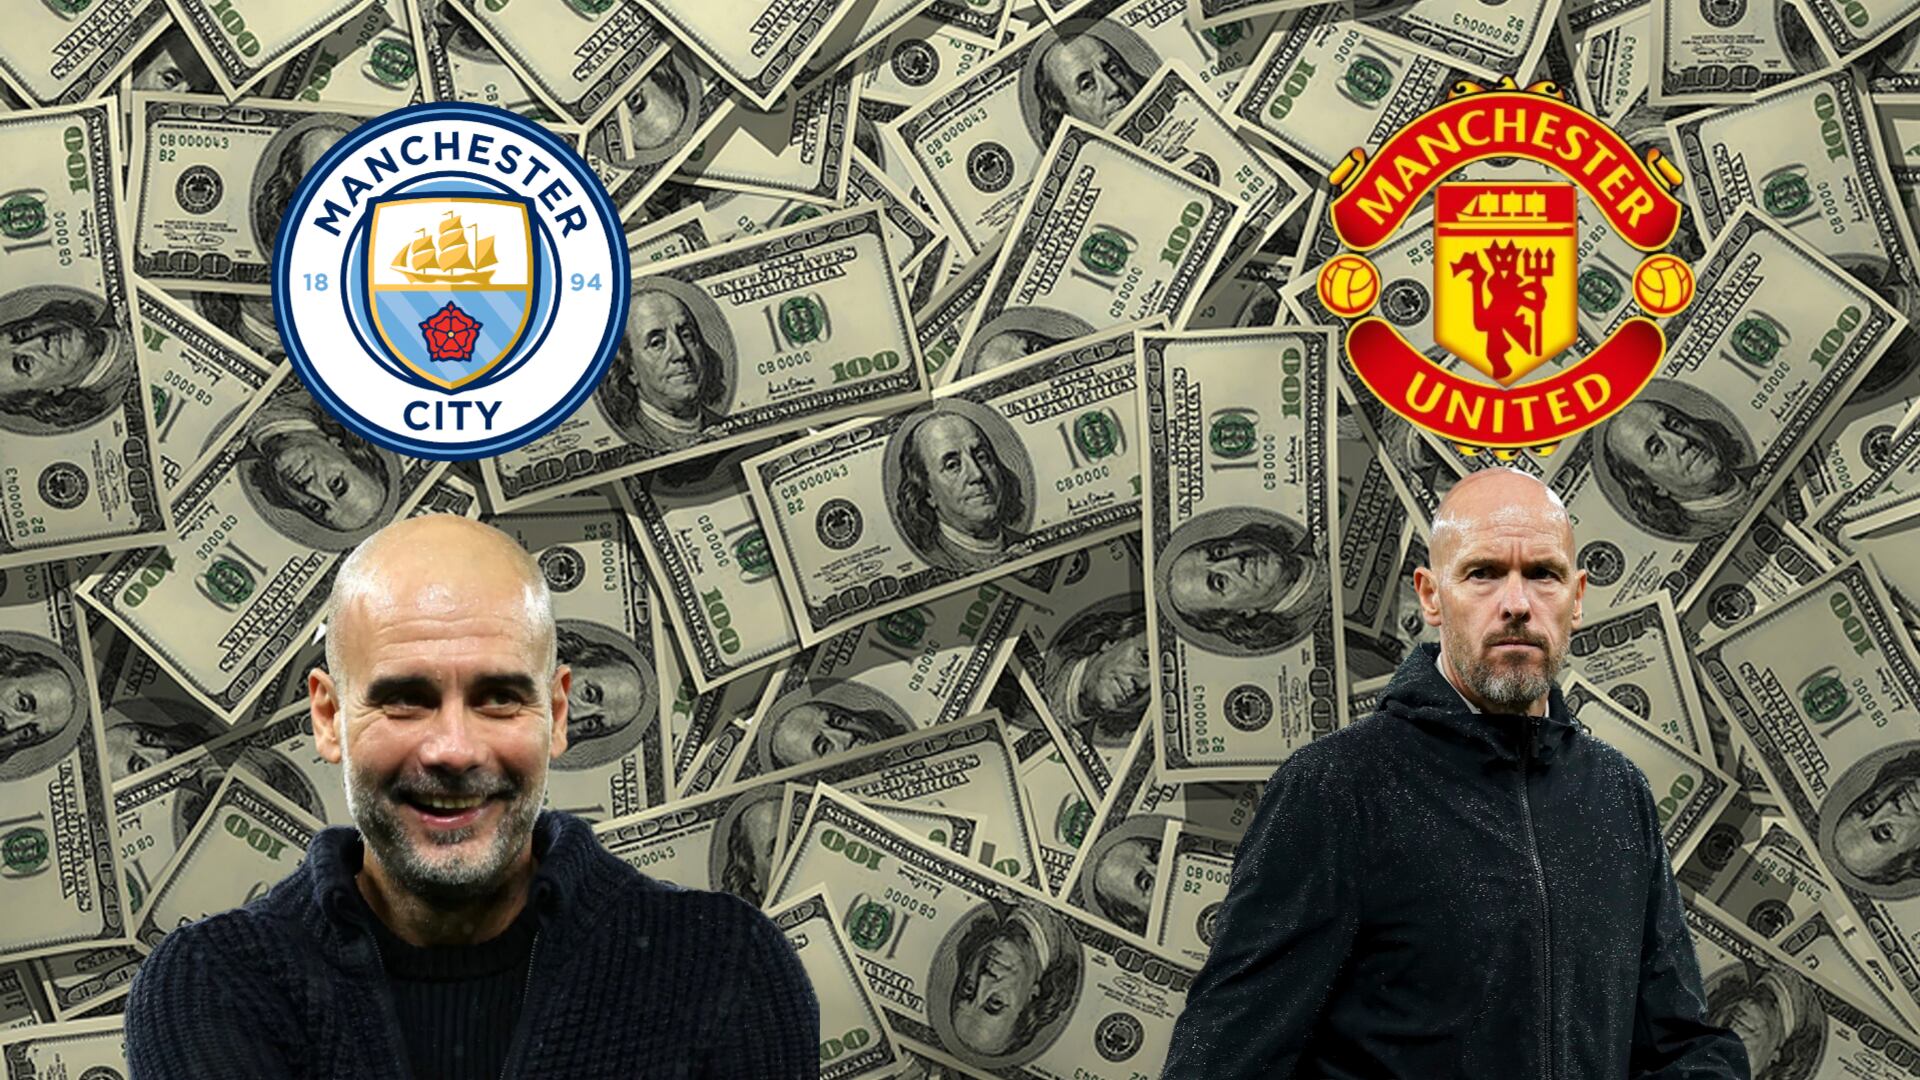 While Manchester City's revenue is $6.2BN, this is Manchester United's revenue